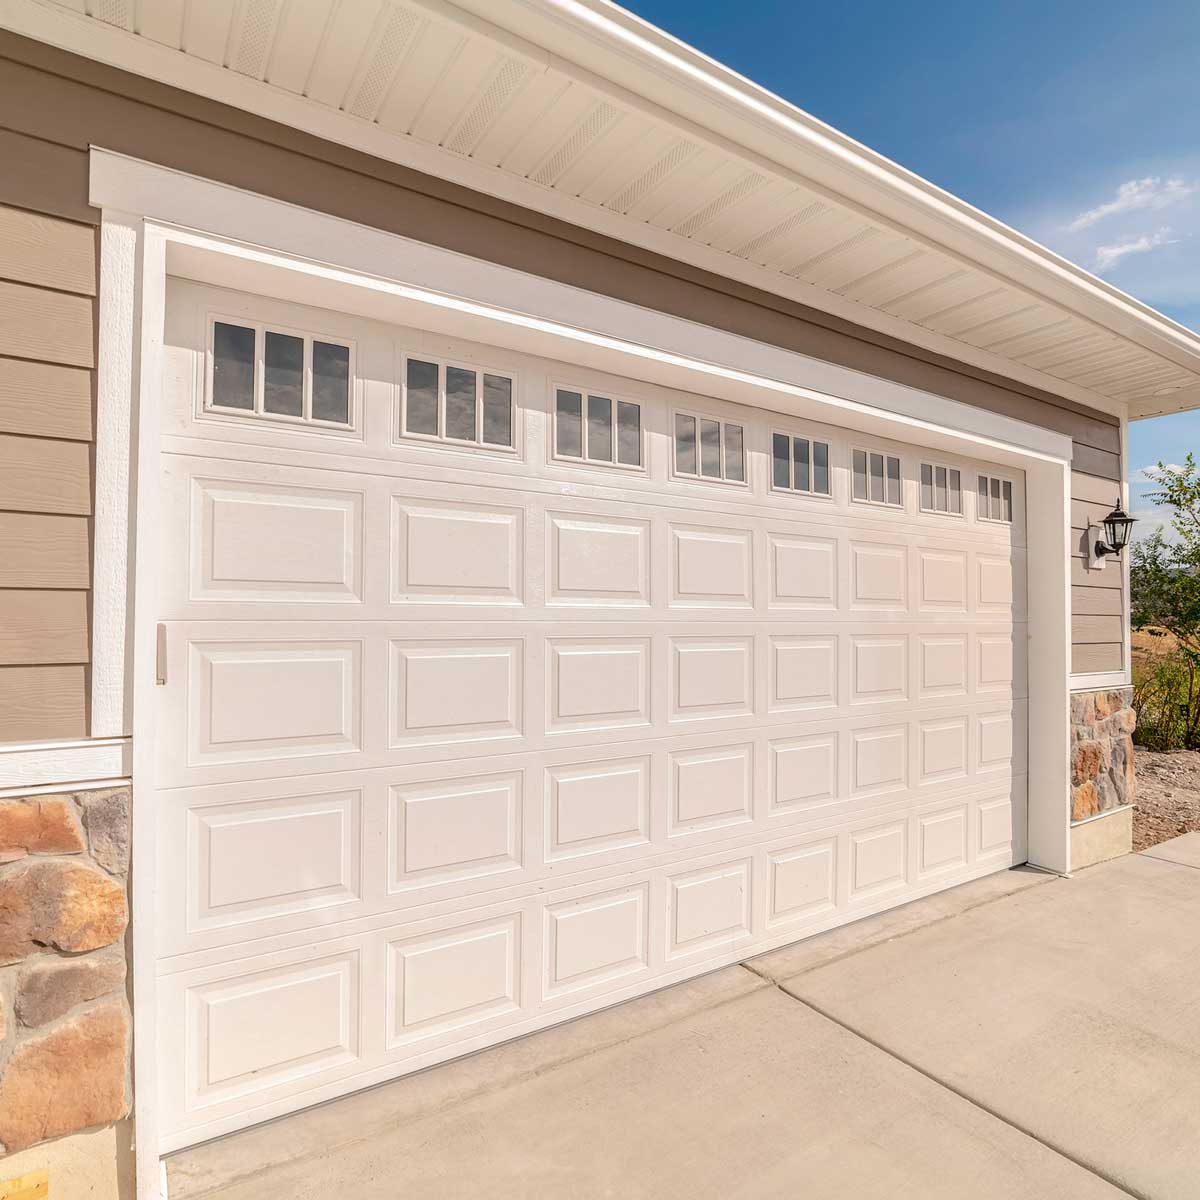 Converting A Garage Into Living Space, How Much Does It Cost To Convert A Room Back Garage